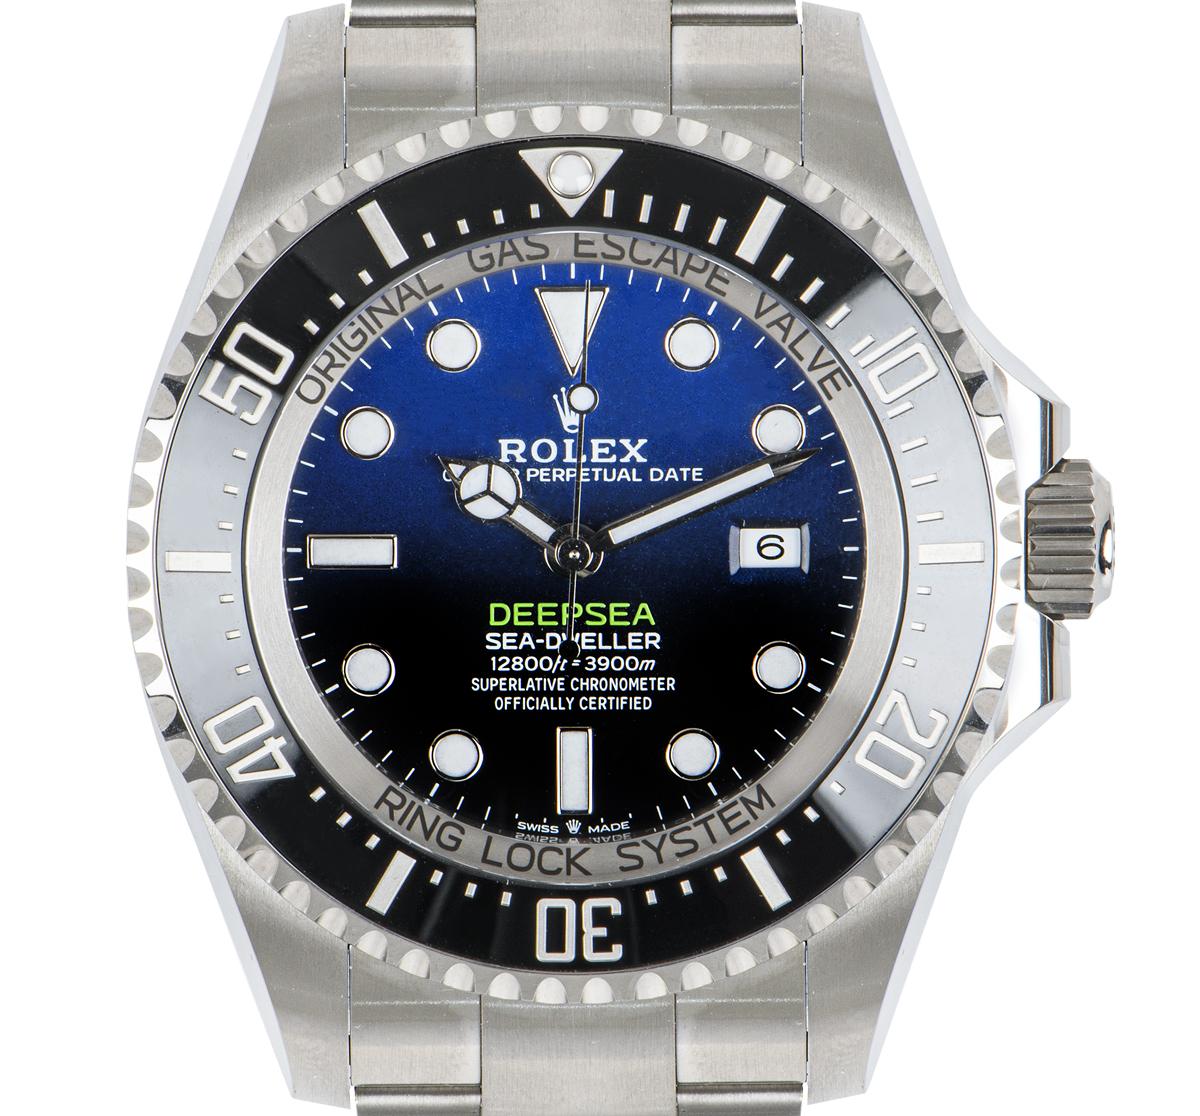 An unworn Deepsea Sea-Dweller in Oystersteel by Rolex. Featuring a D-Blue dial under a domed scratch-resistant sapphire crystal. The stainless steel uni-directional rotatable bezel has a ceramic insert, with platinum coated 60-minute